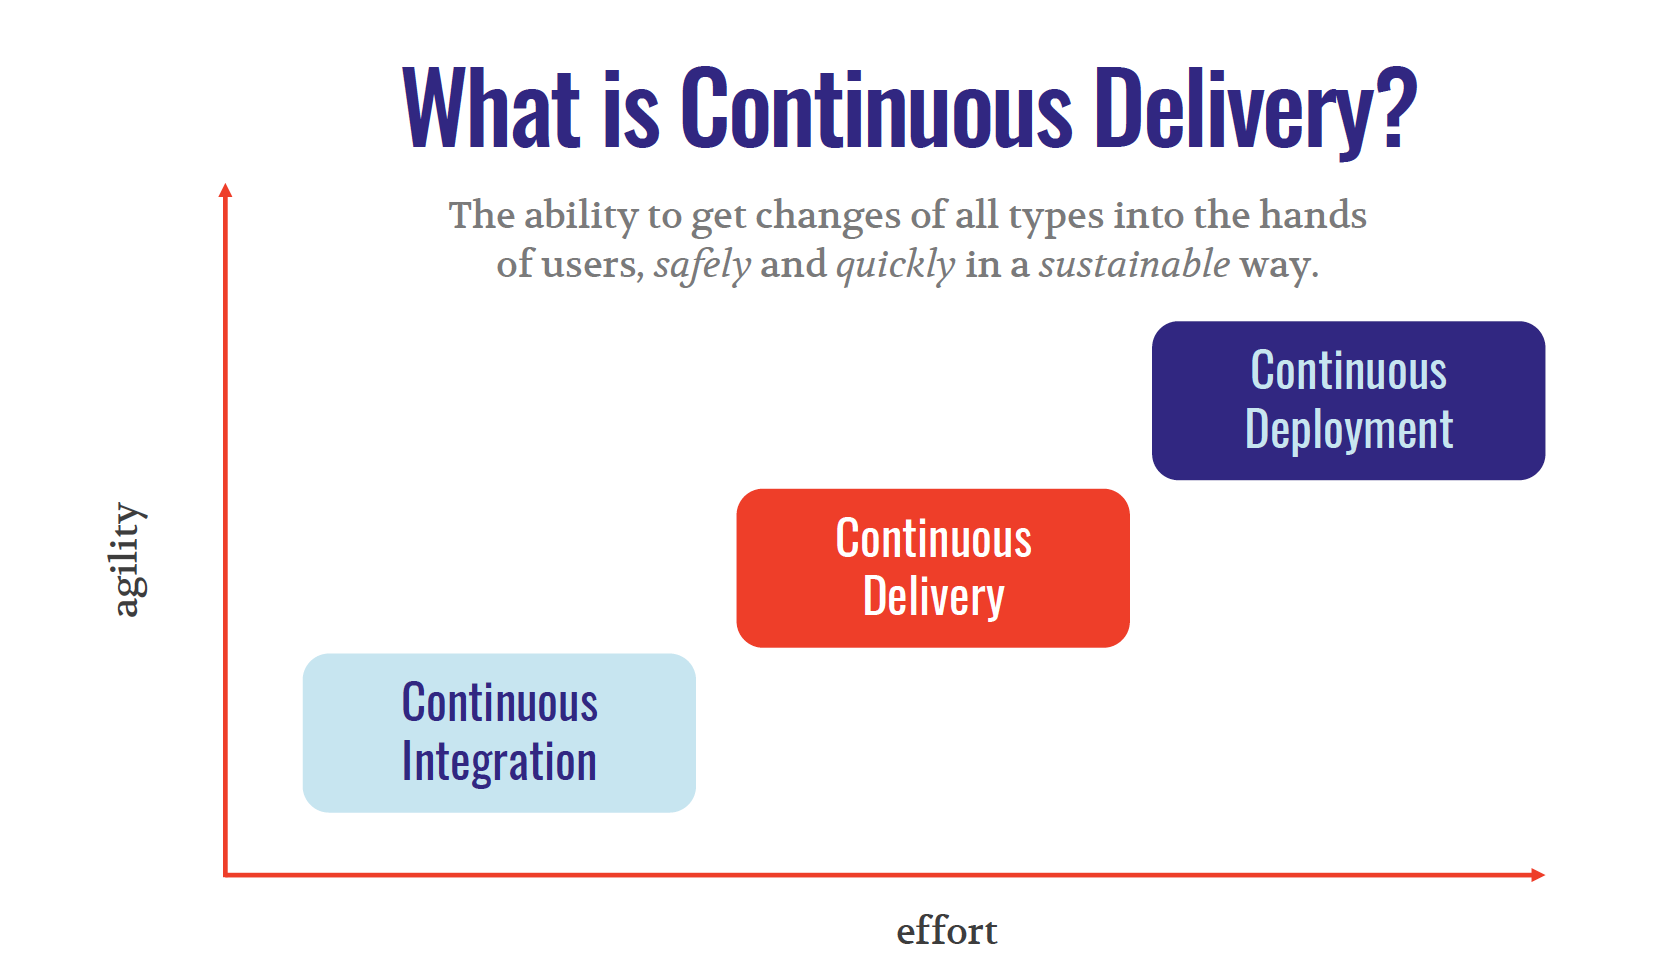 What is continuous delivery?